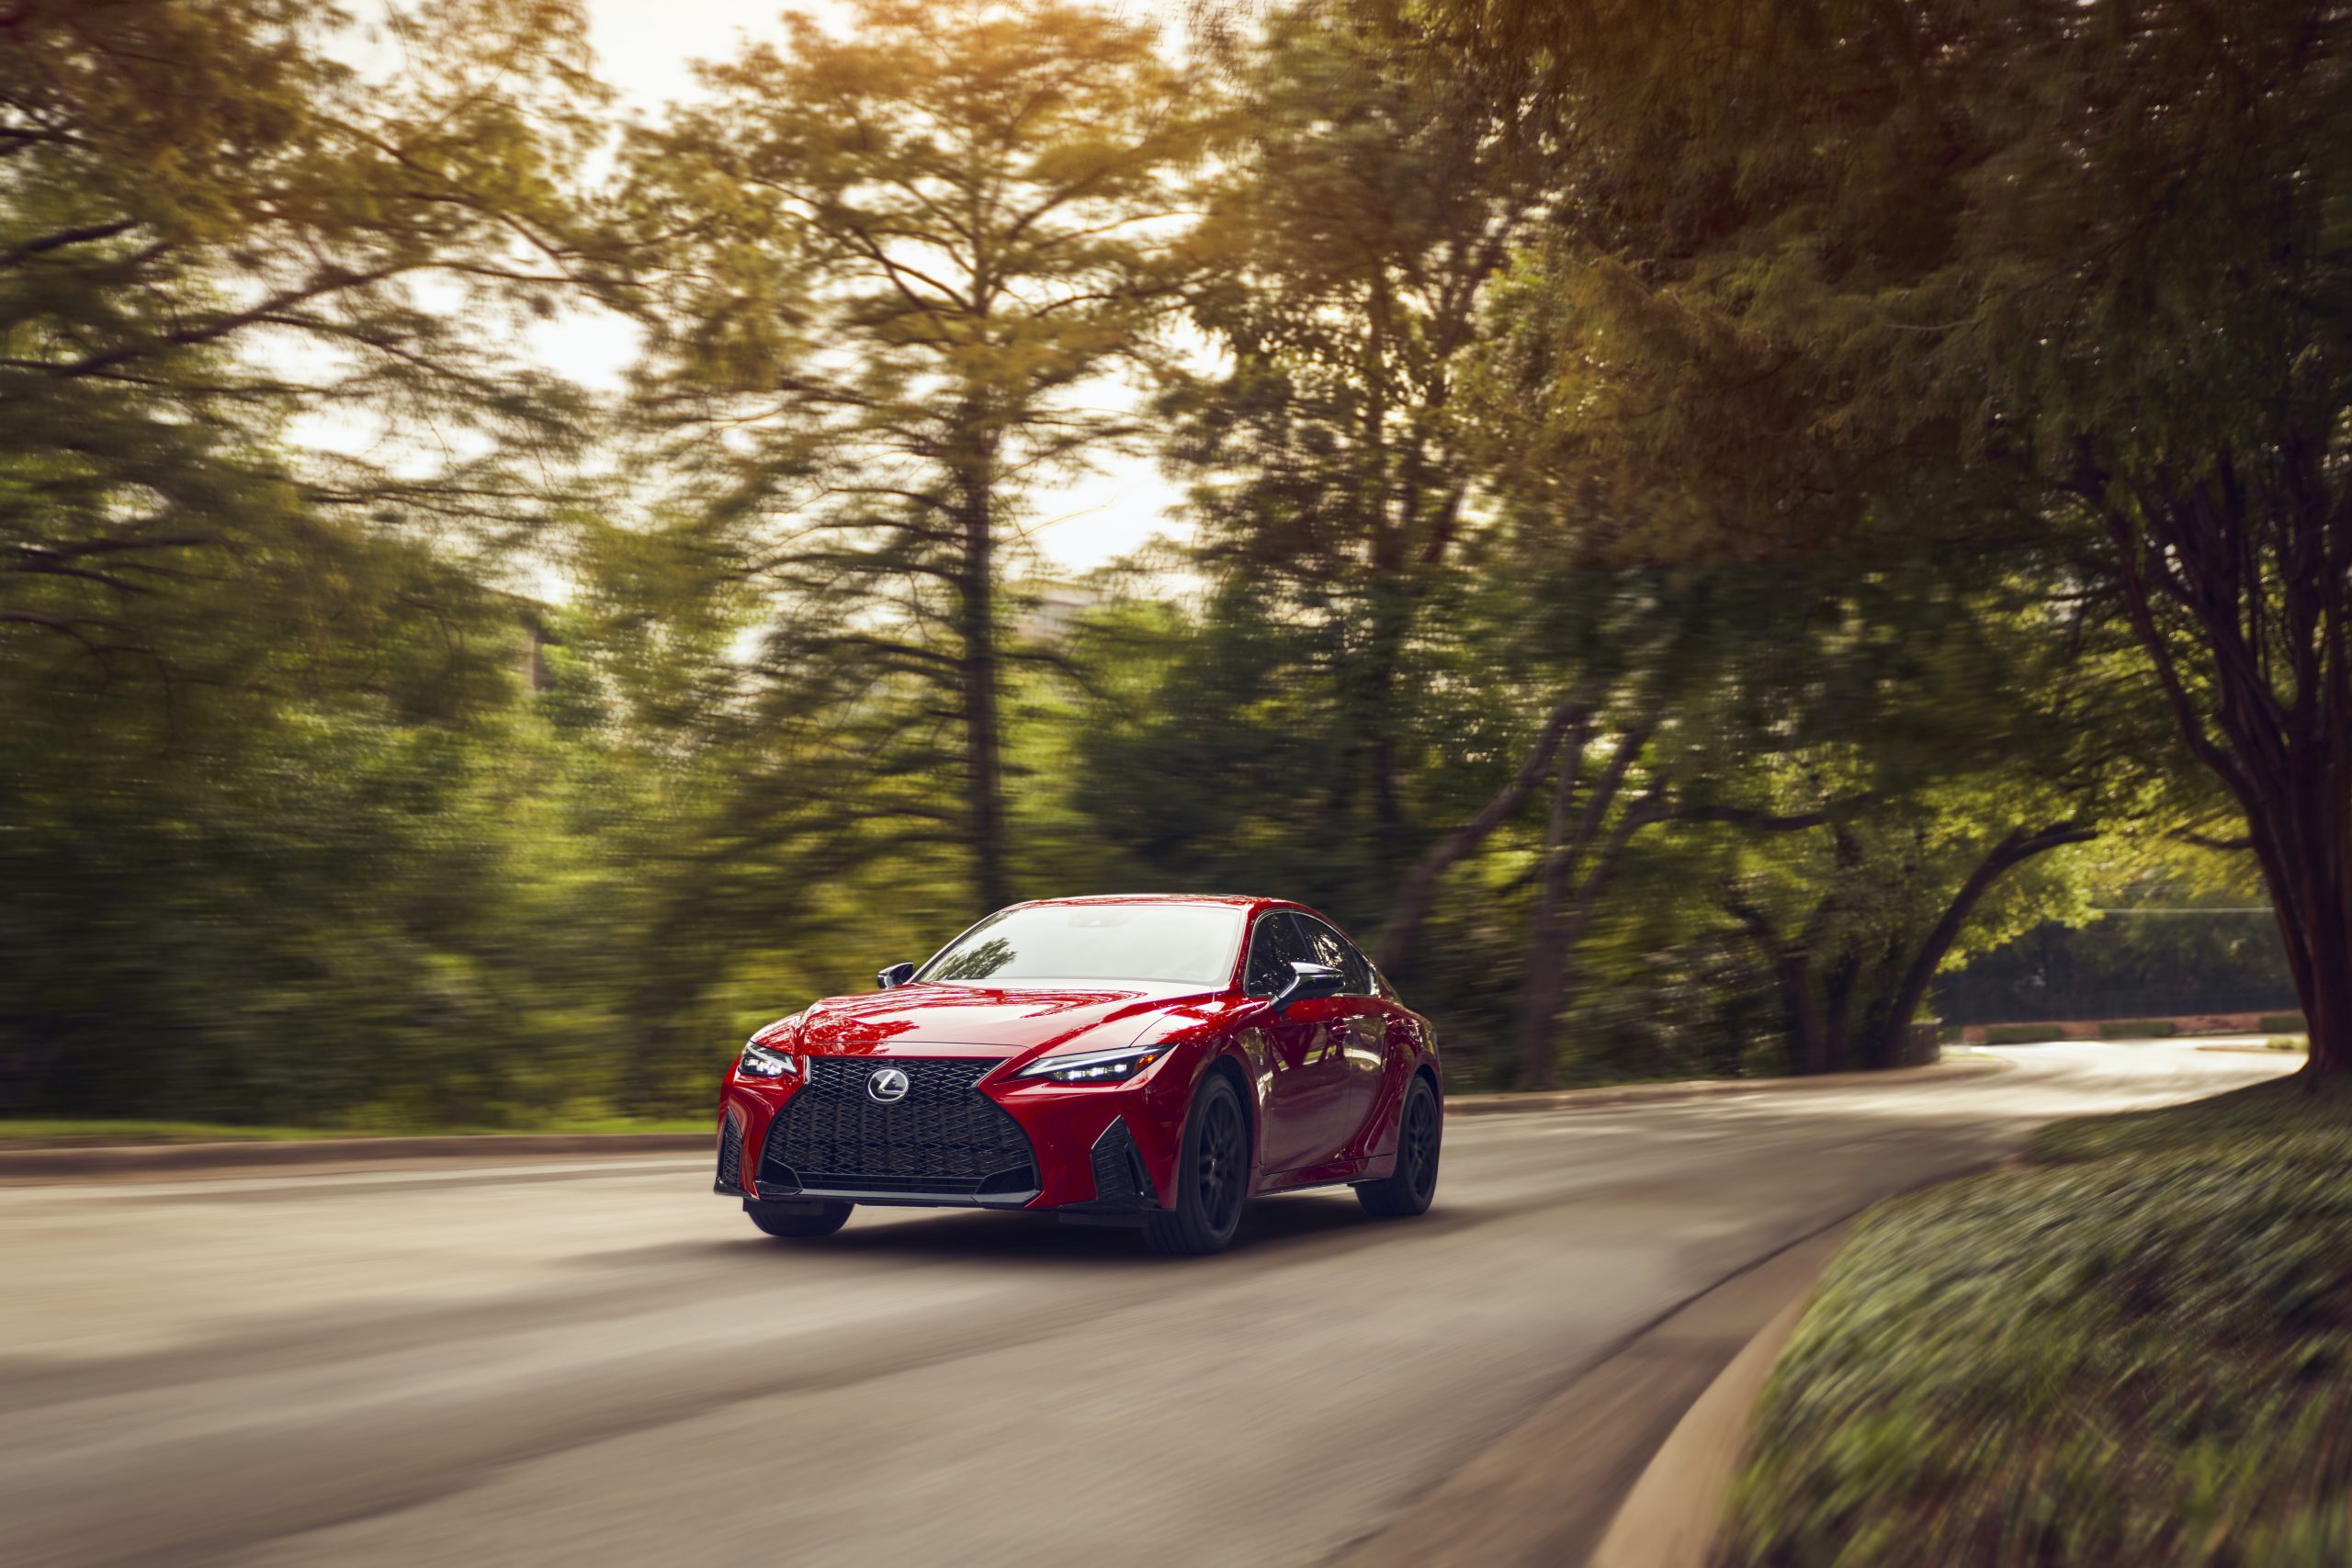 A red 2021 Lexus IS driving on a tree-lined road